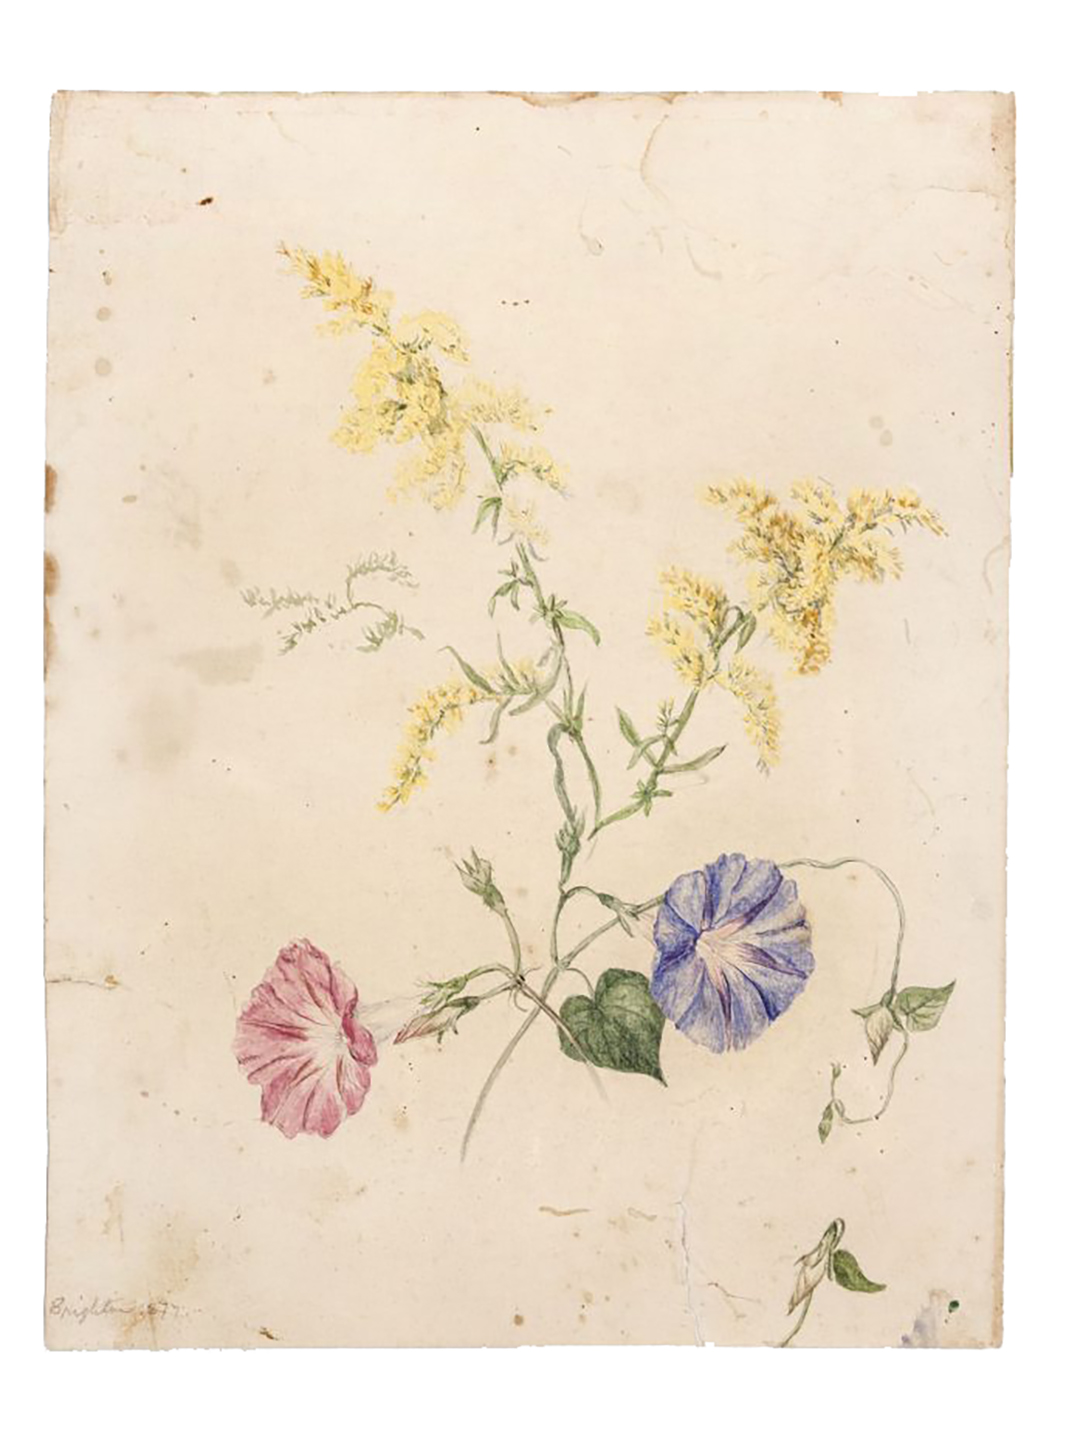 Emily Cole, Untitled, n.d., watercolor and pencil on paper, 7 5/16″ x 10 5/16″. Courtesy of Thomas Cole National Historic Site, Catskill, NY, Gift of Edith Cole Silberstein